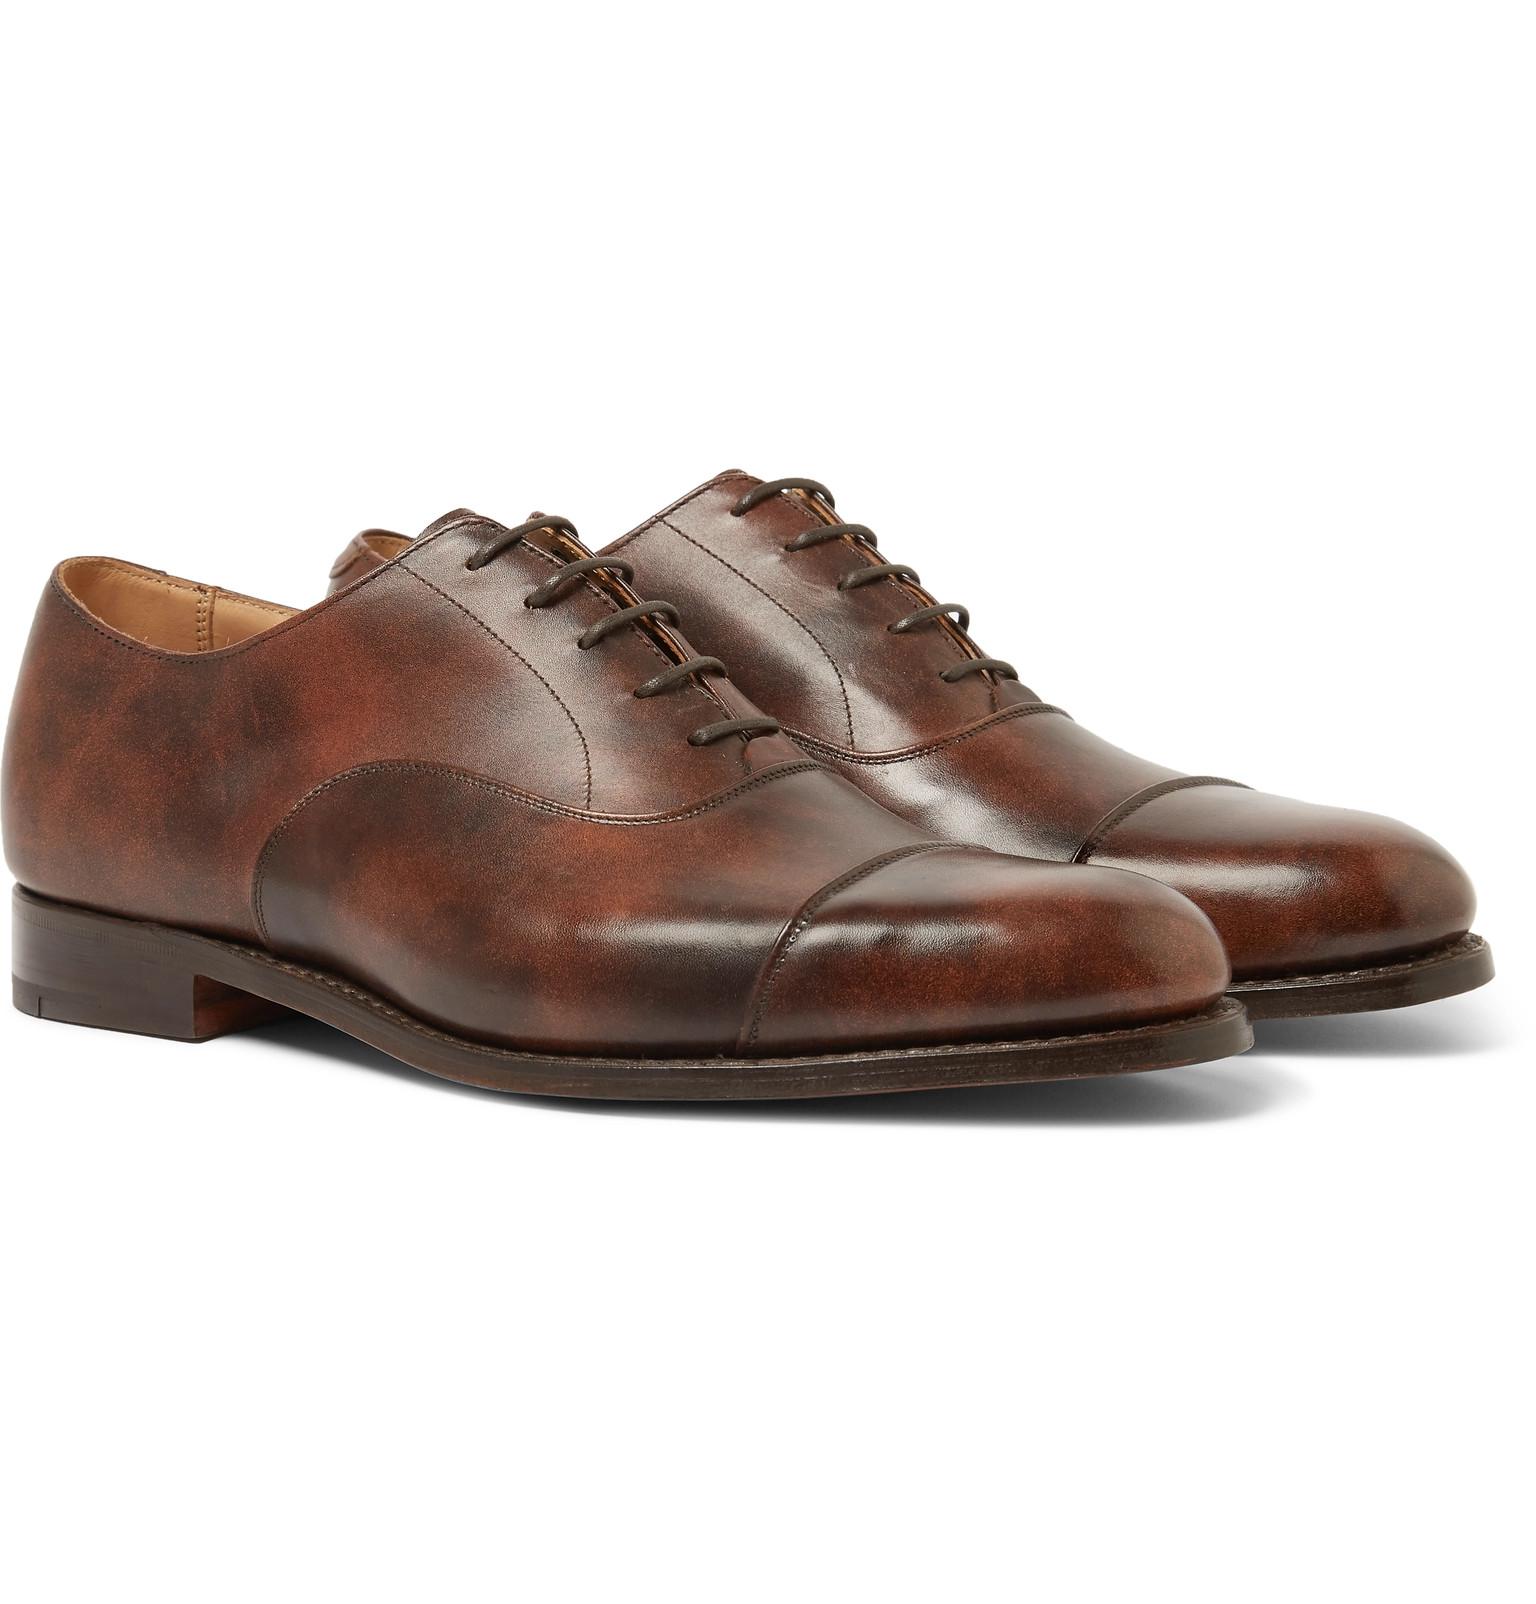 Tricker's Appleton Leather Oxford Shoes in Brown for Men - Lyst